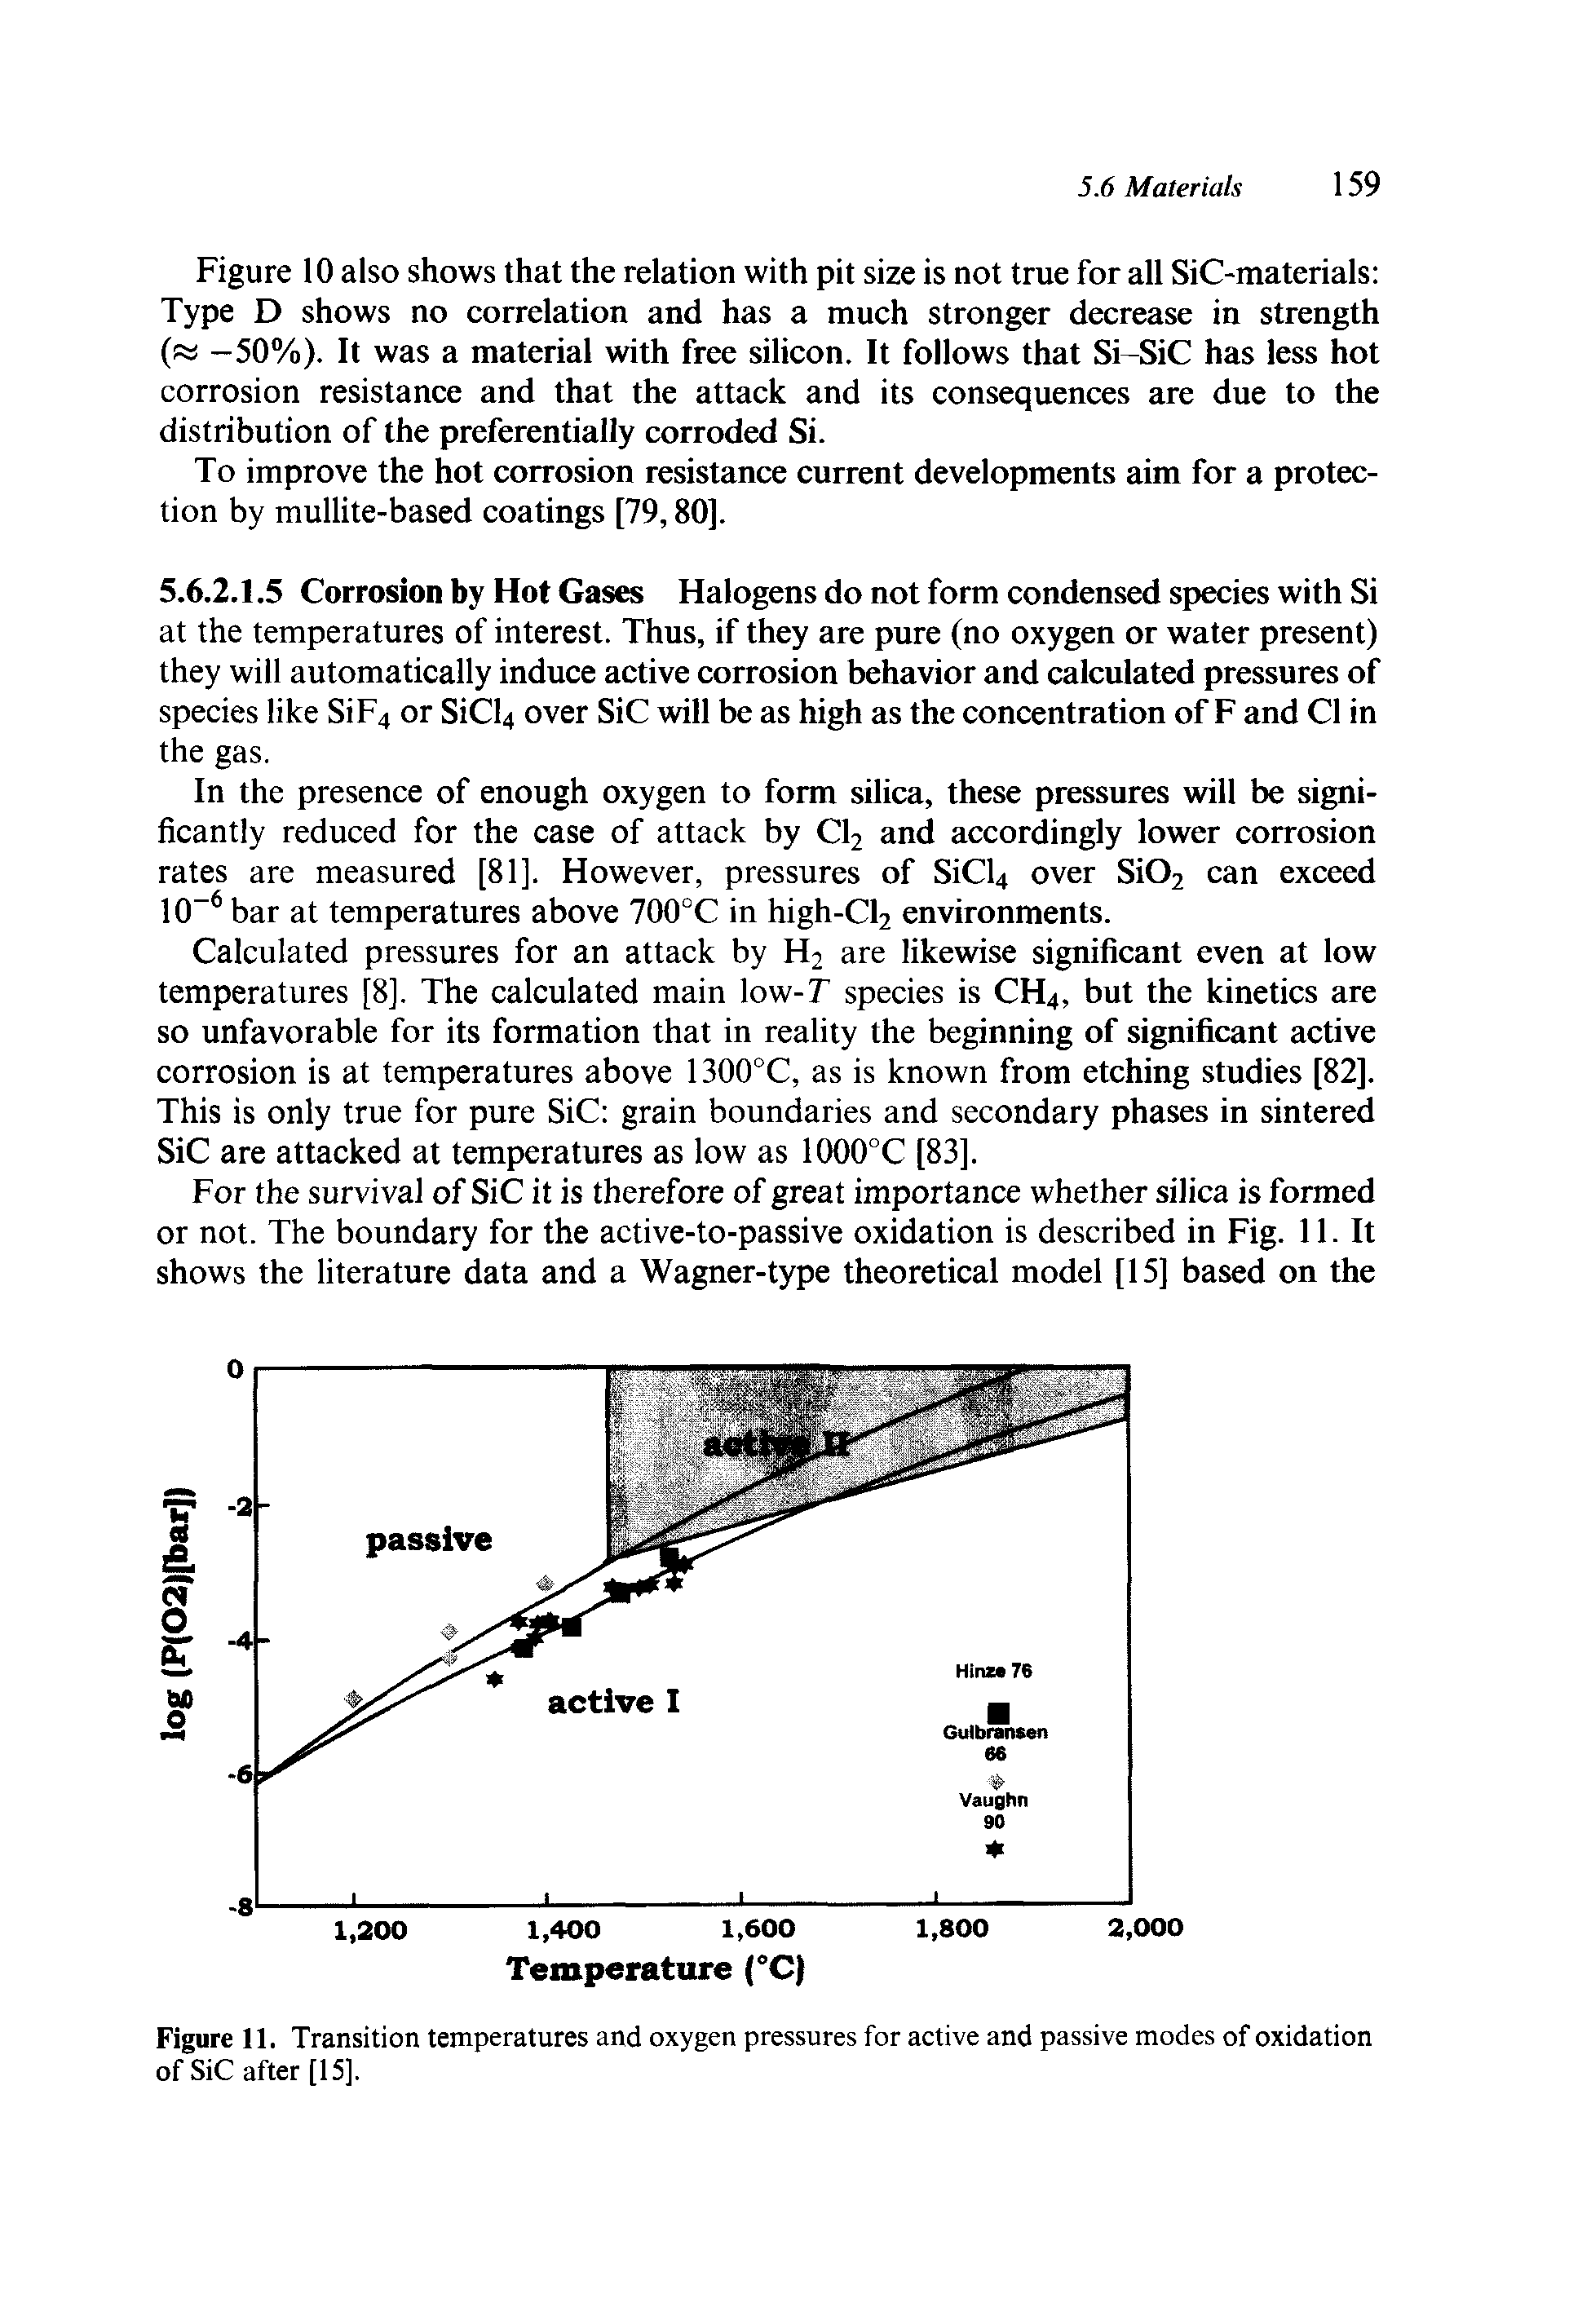 Figure 11. Transition temperatures and oxygen pressures for active and passive modes of oxidation of SiC after [15].